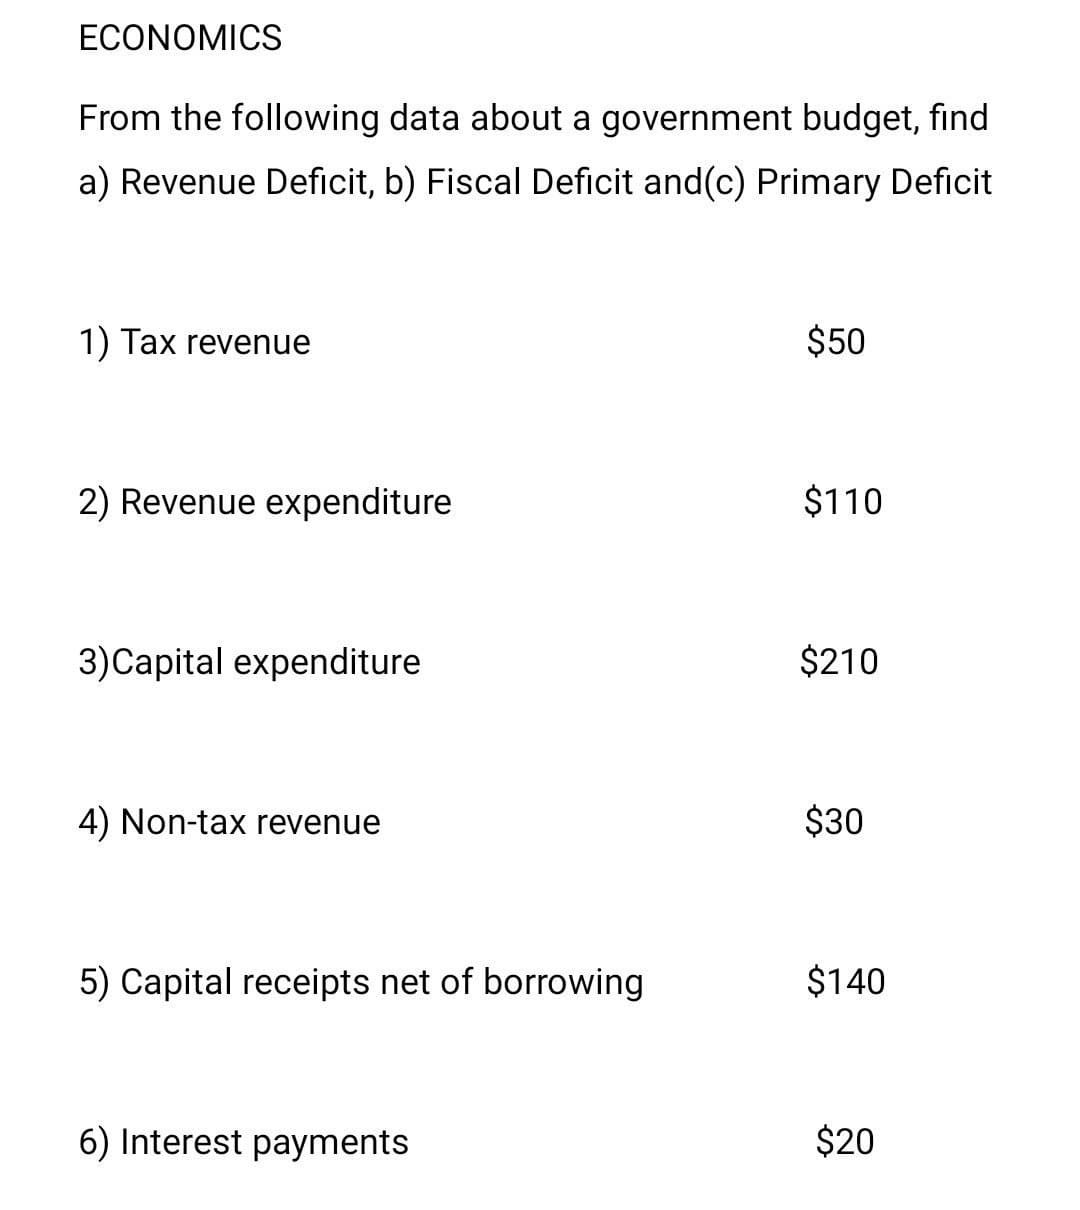 ECONOMICS
From the following data about a government budget, find
a) Revenue Deficit, b) Fiscal Deficit and(c) Primary Deficit
1) Tax revenue
$50
2) Revenue expenditure
$110
3)Capital expenditure
$210
4) Non-tax revenue
$30
5) Capital receipts net of borrowing
$140
6) Interest payments
$20
